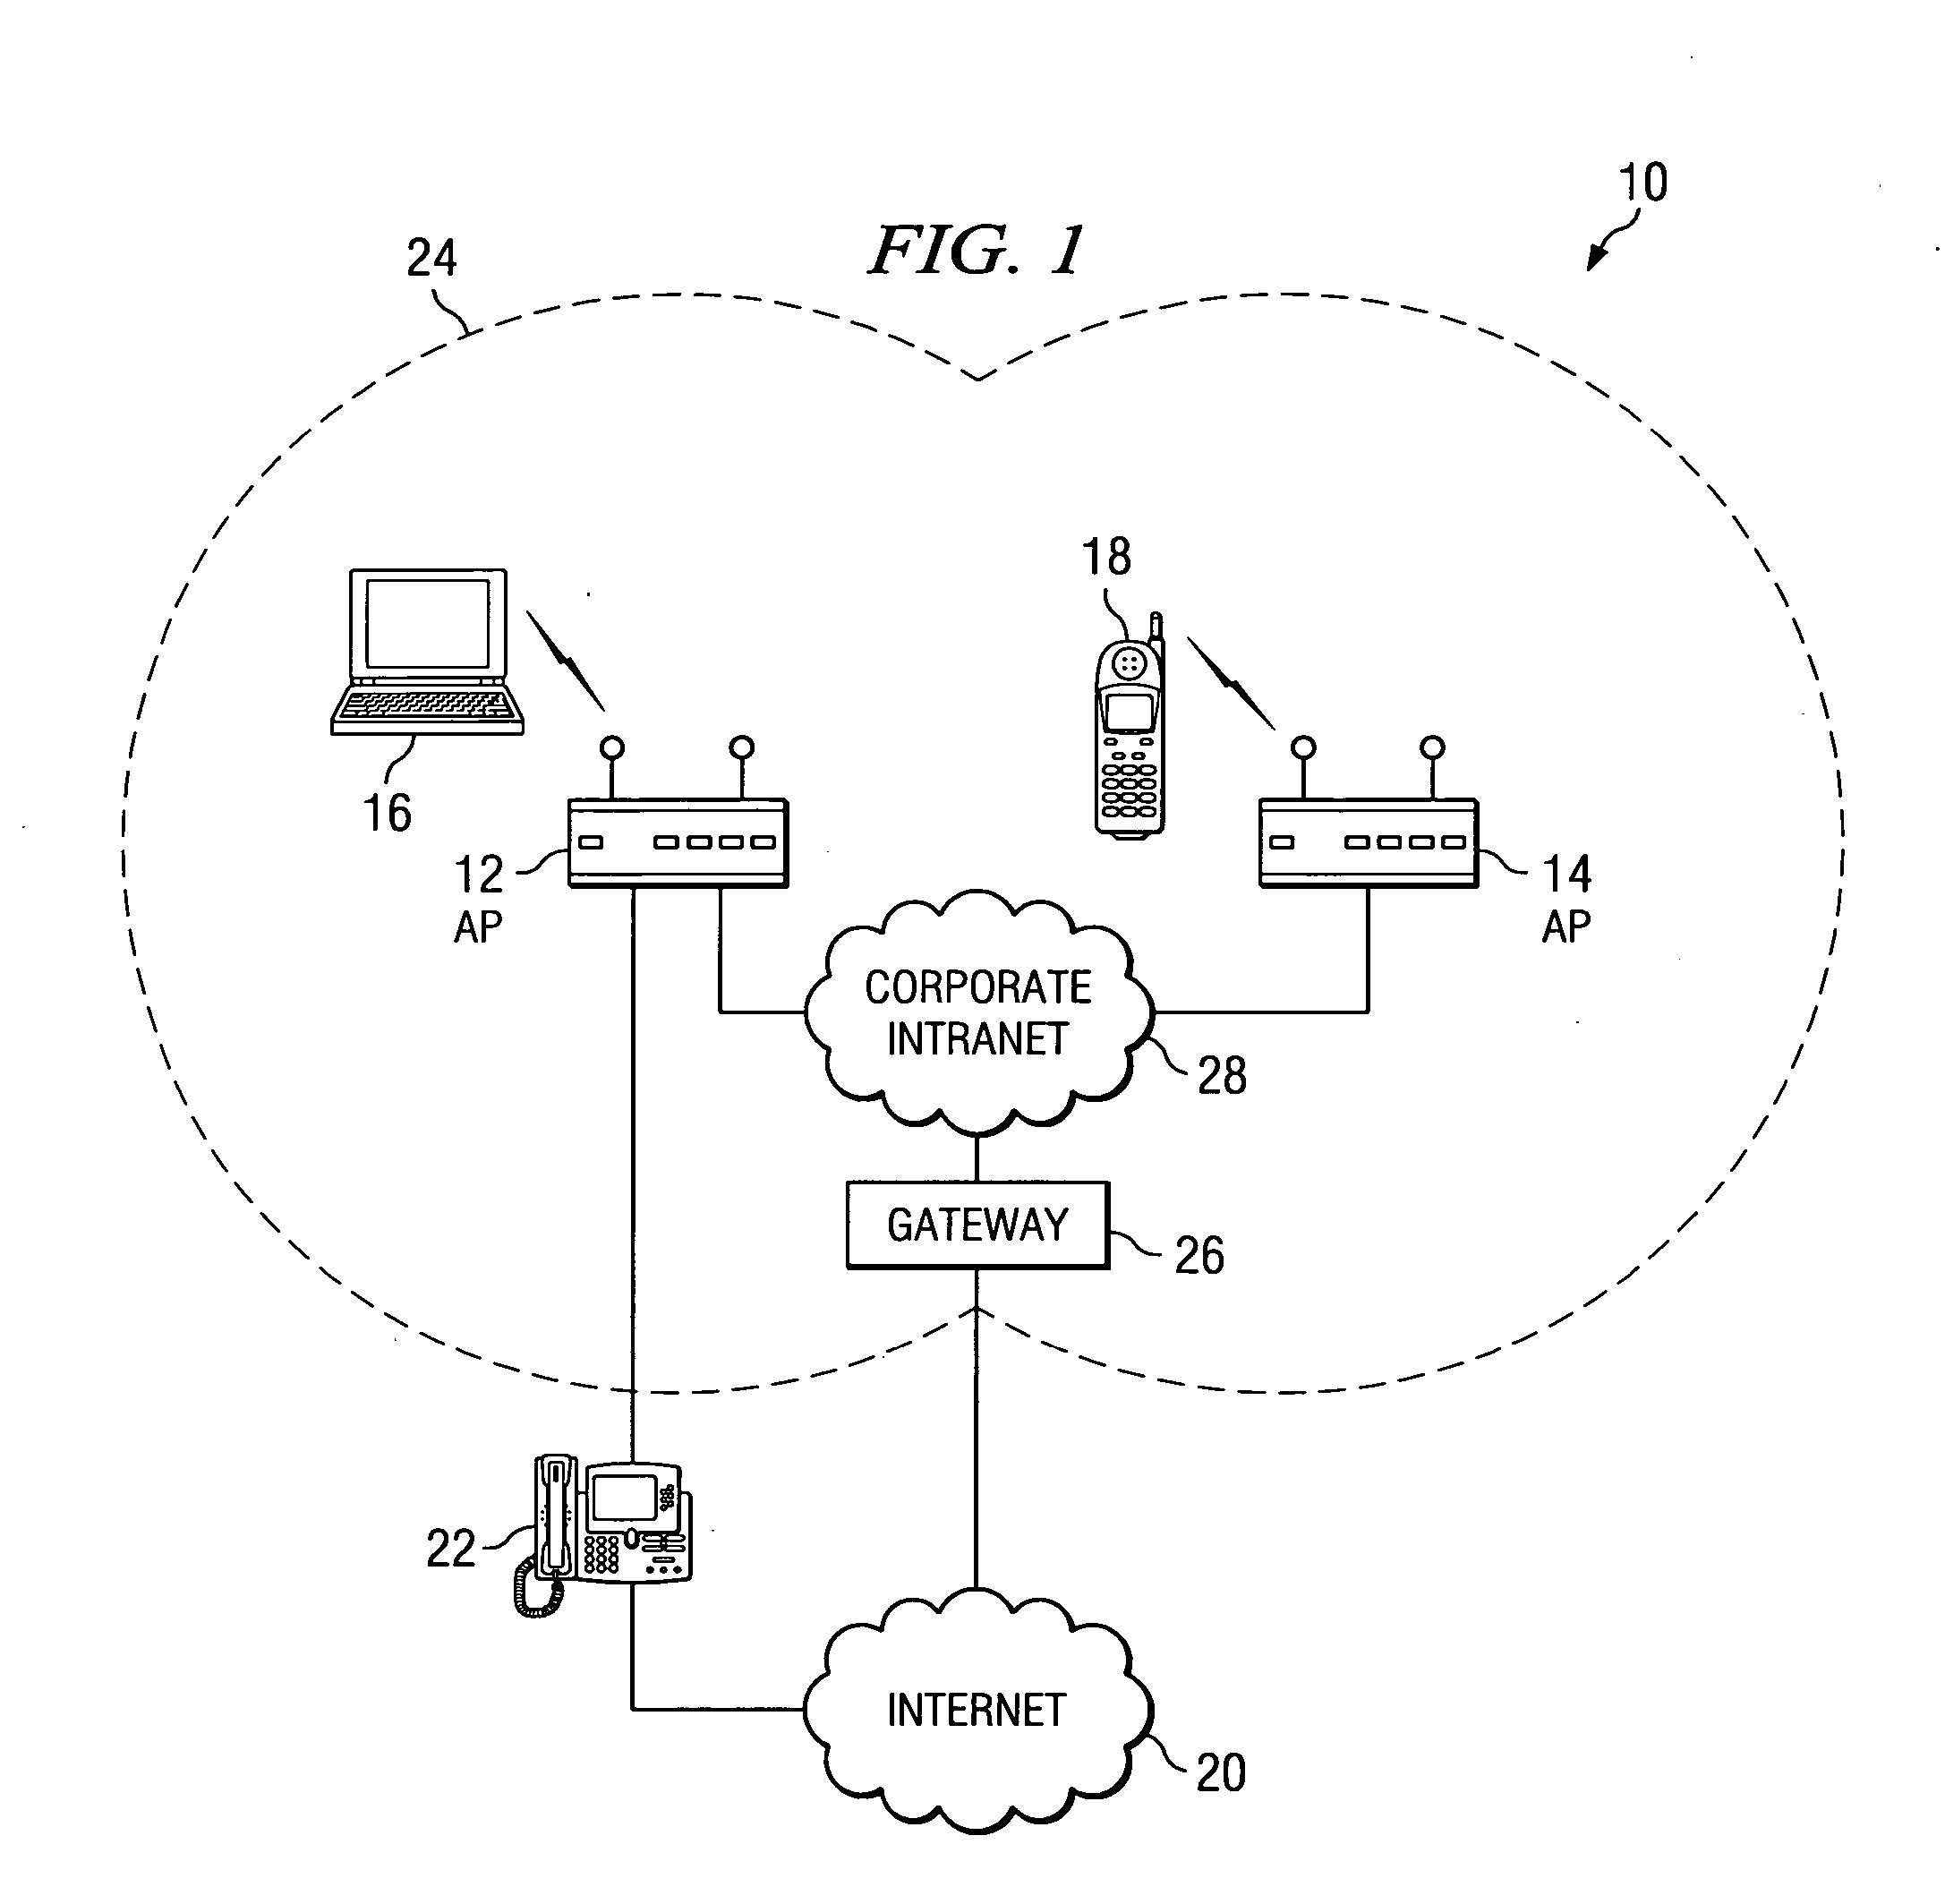 Unconnected power save mode for improving battery life of wireless stations in wireless local area networks